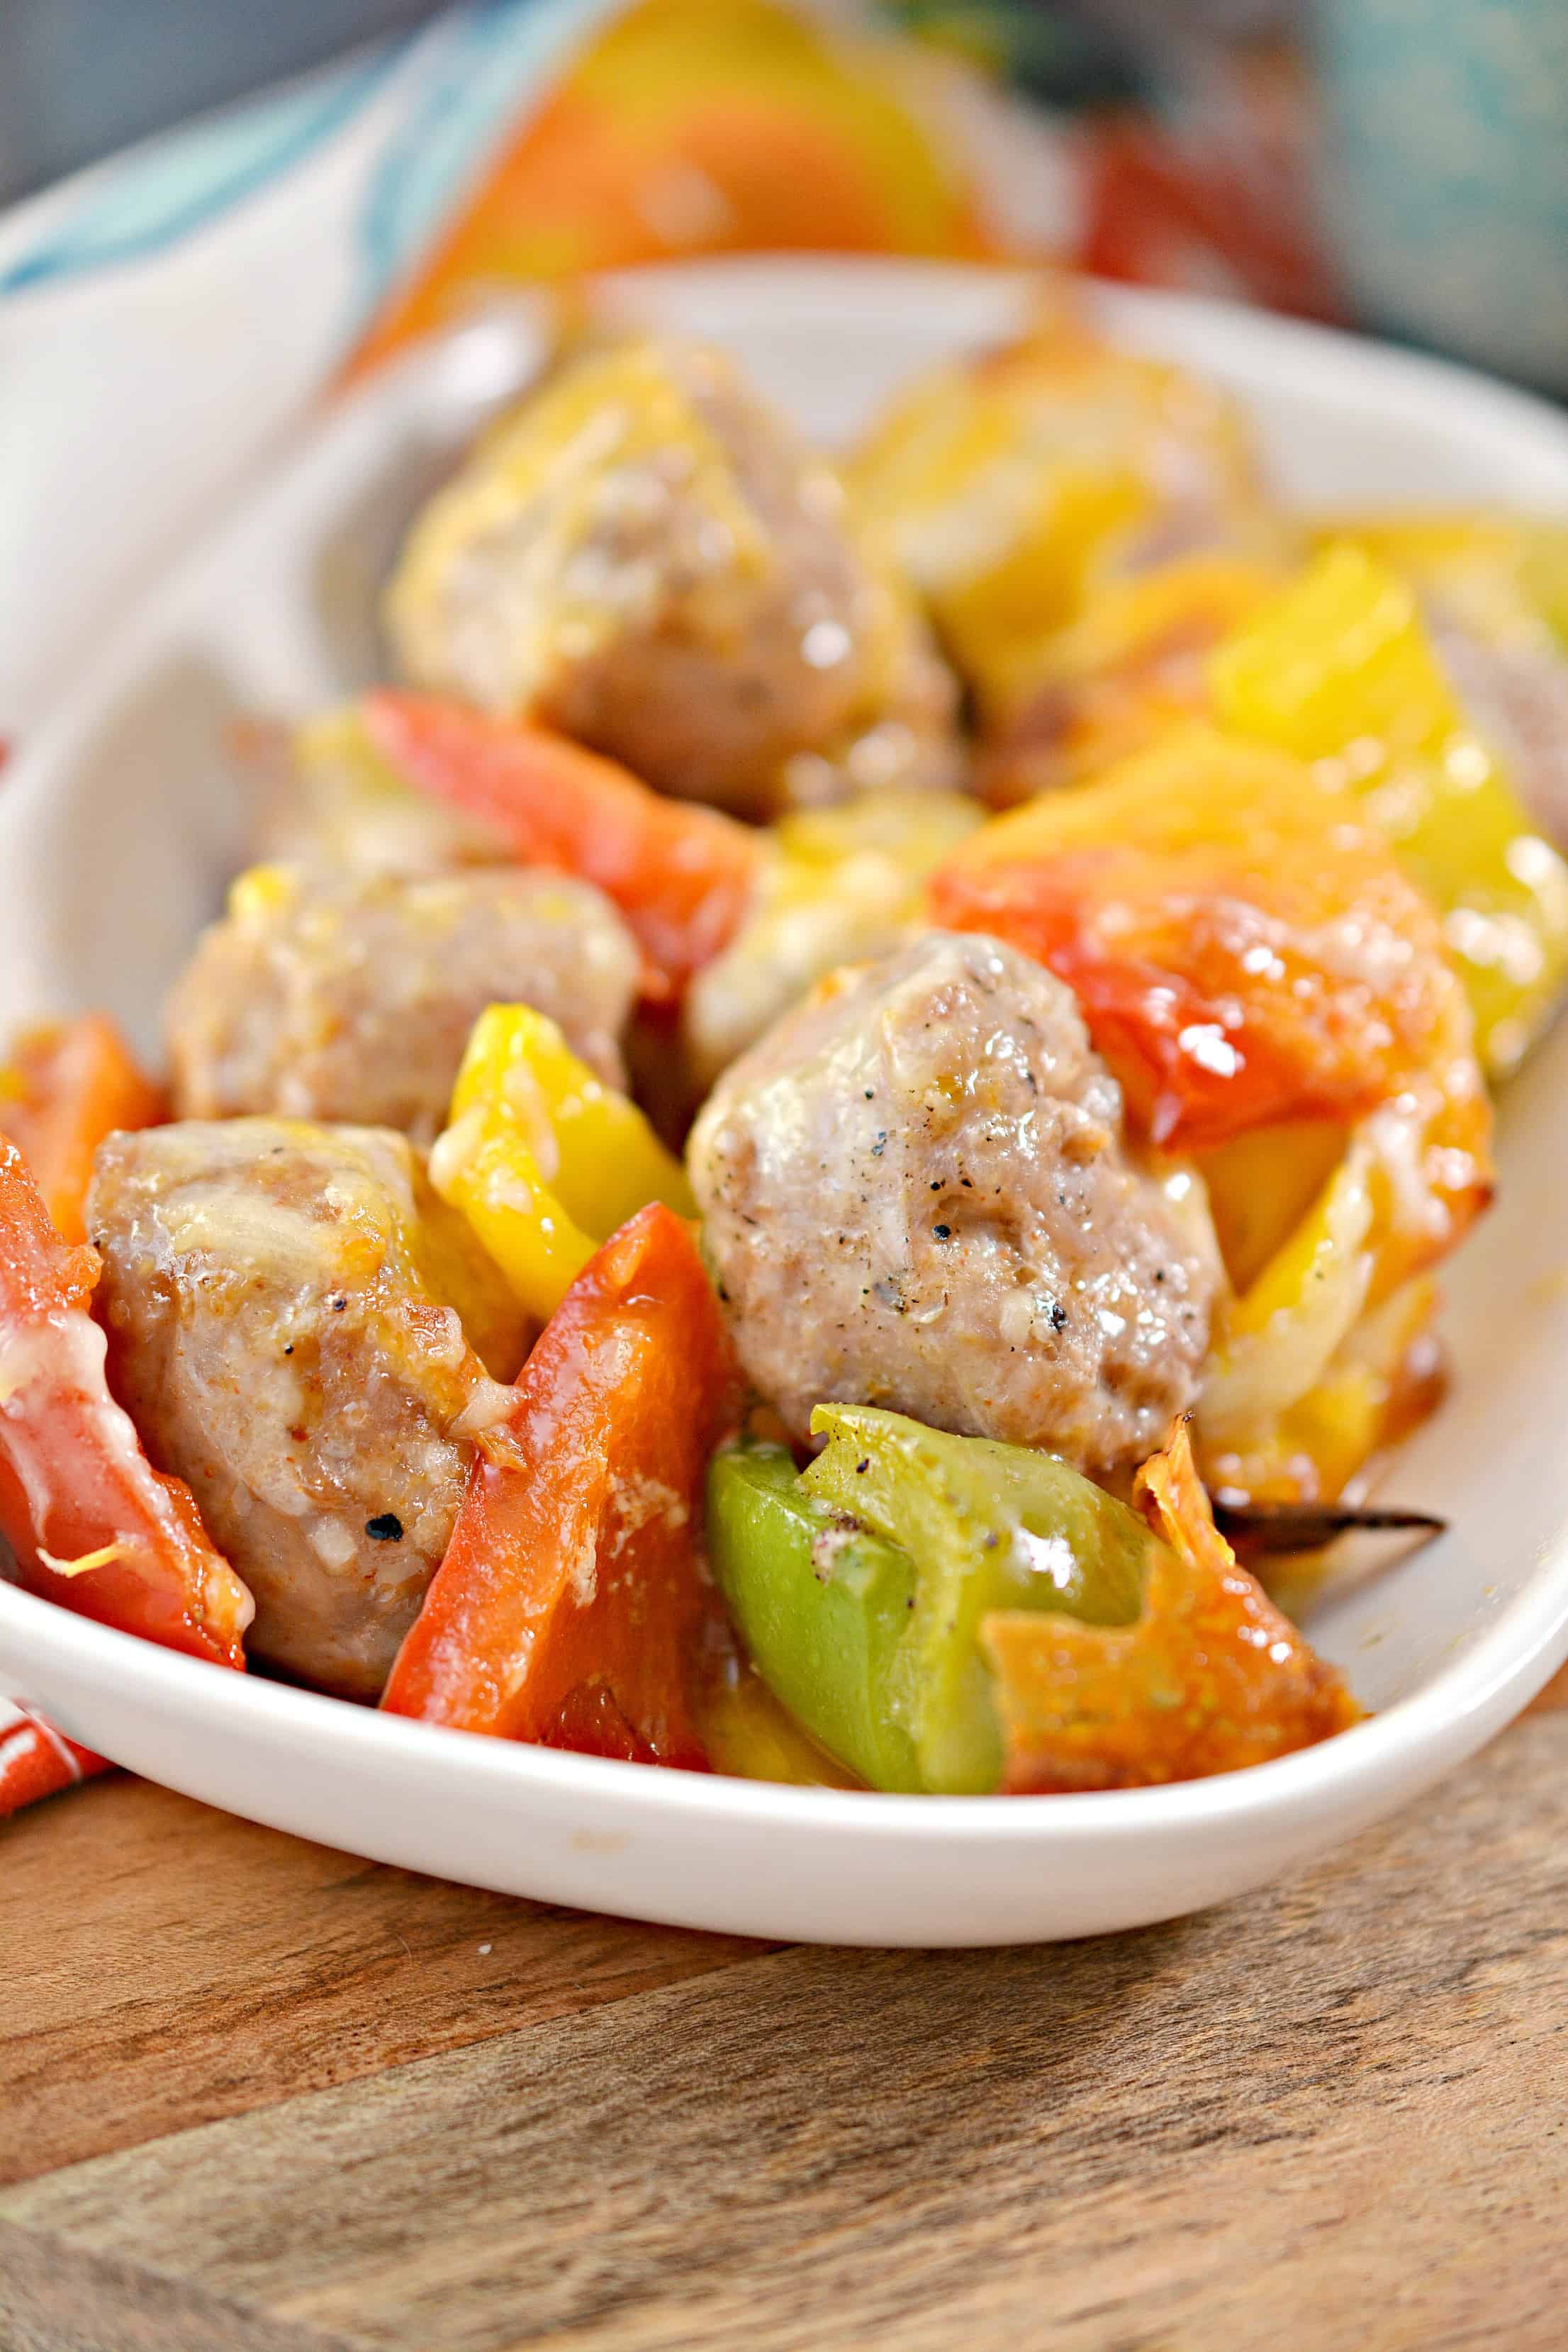 Cheesy Italian Sausage Bake with Peppers